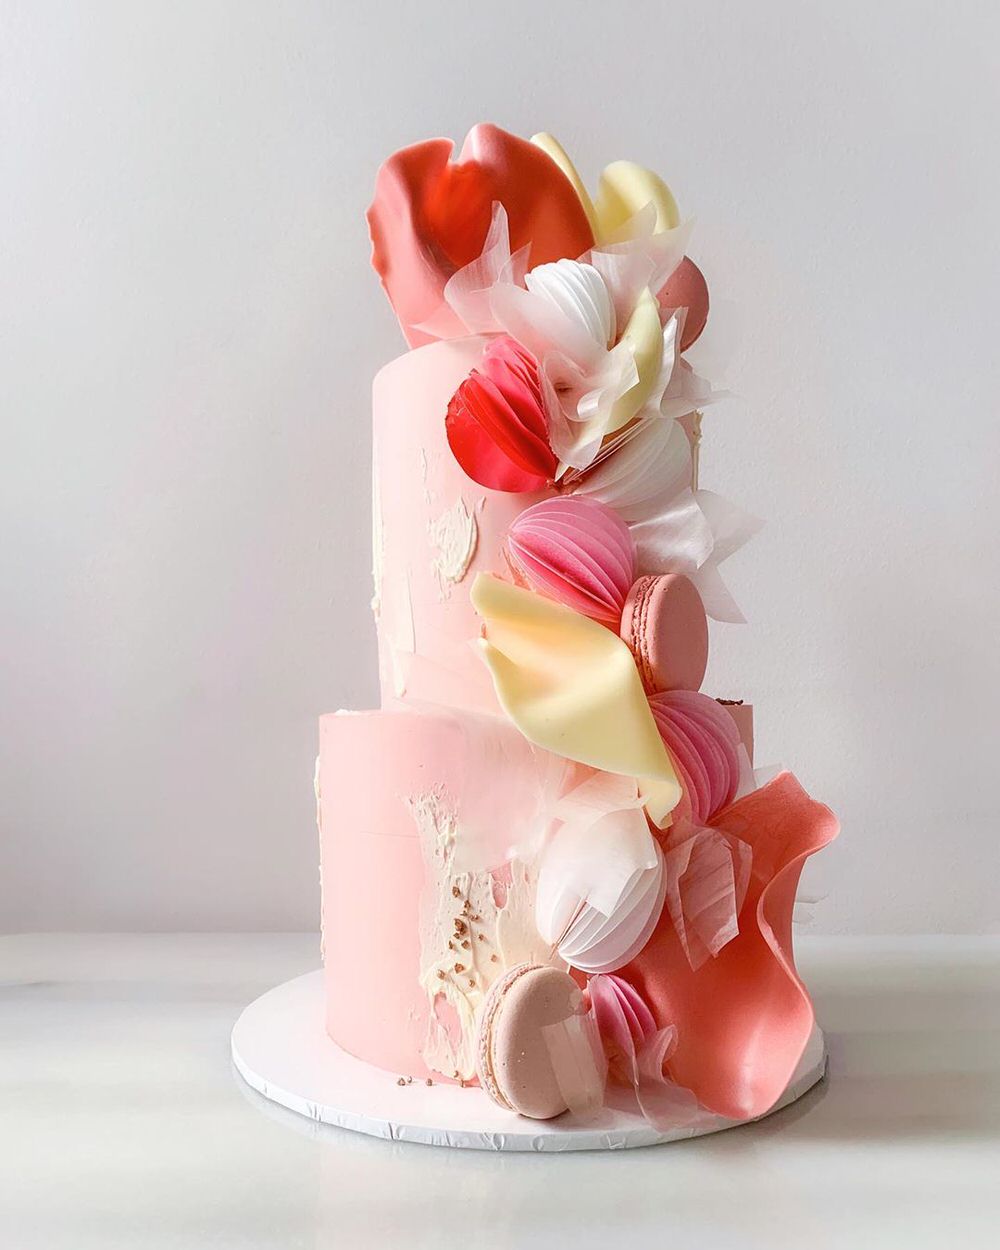 The 10 Best Wedding Cakes in Saint Clair, MO - WeddingWire